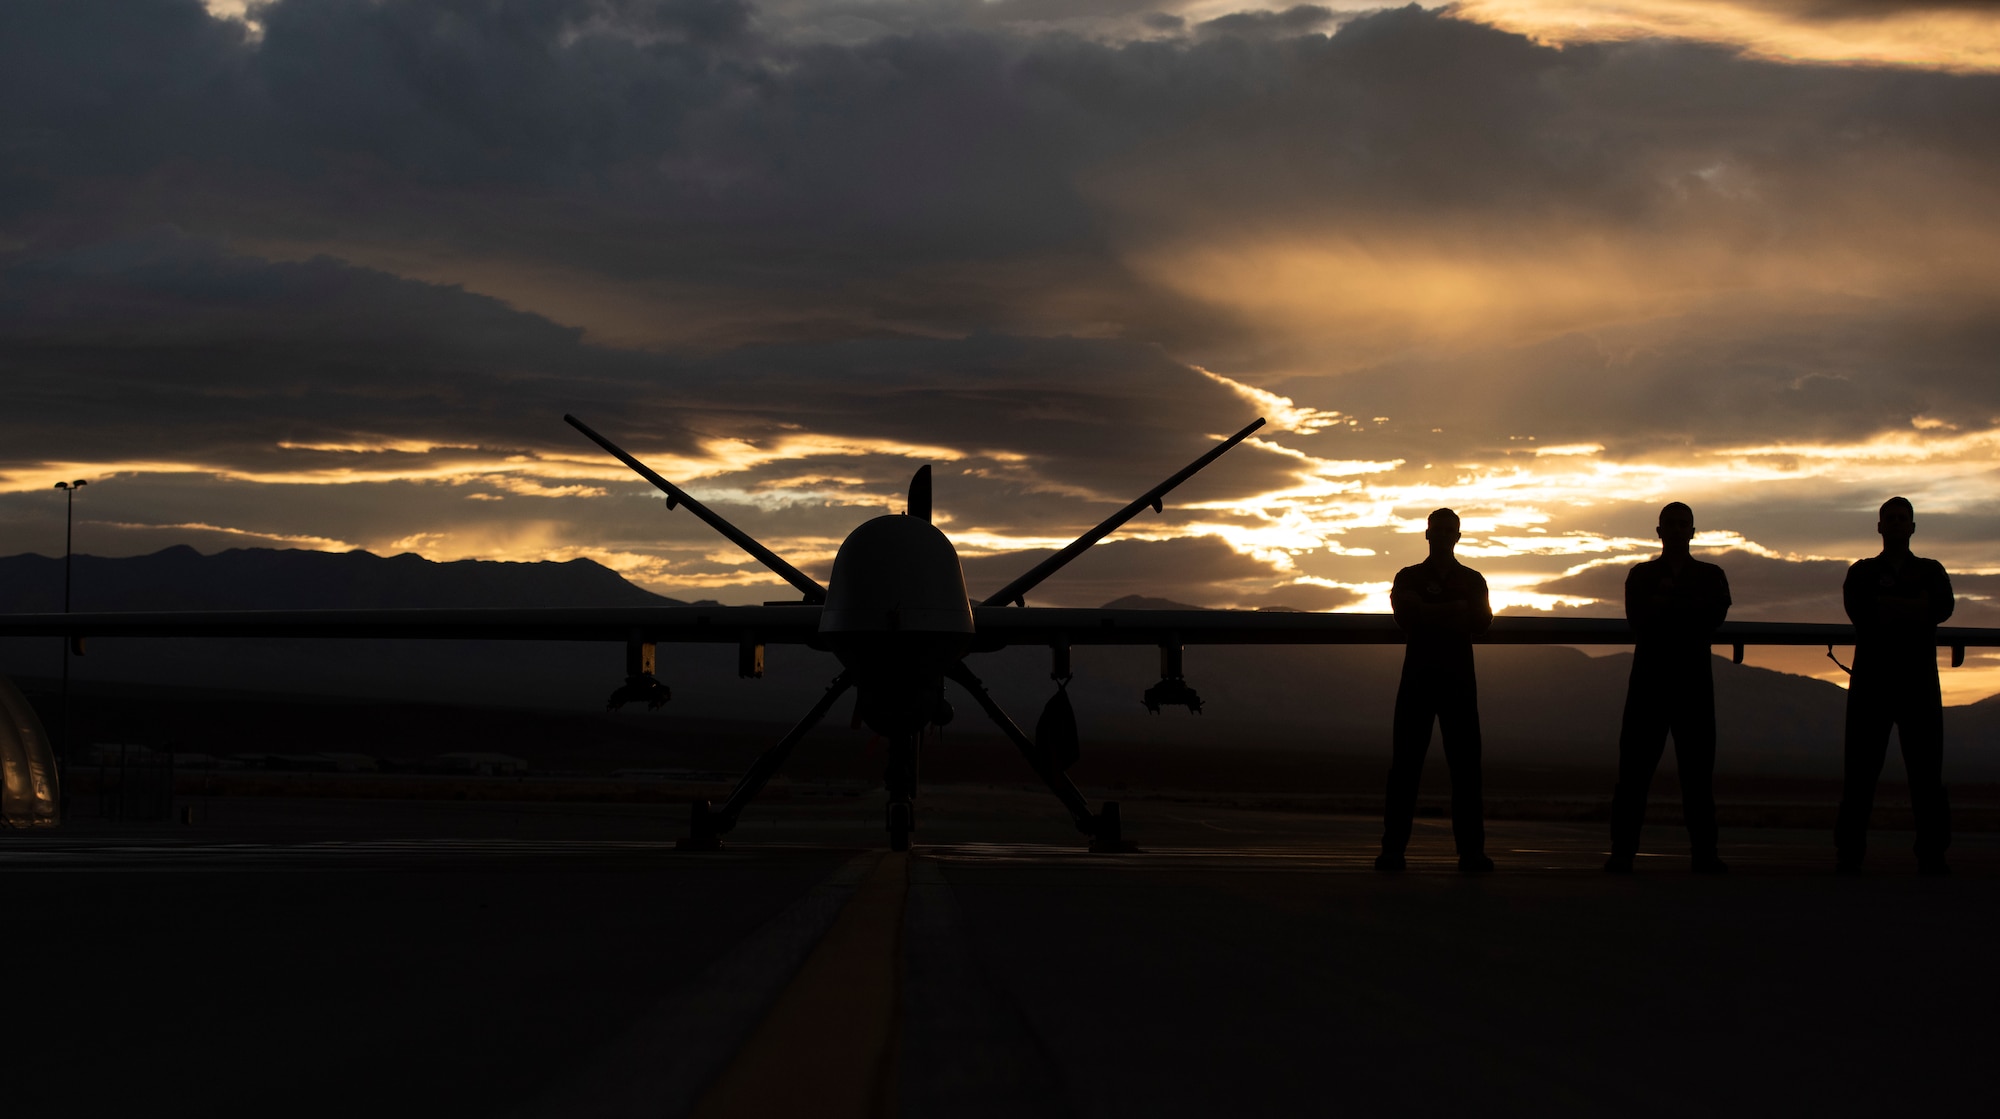 3 Airmen pose in front of an MQ-9 Reaper underneath a Nevada sunset.